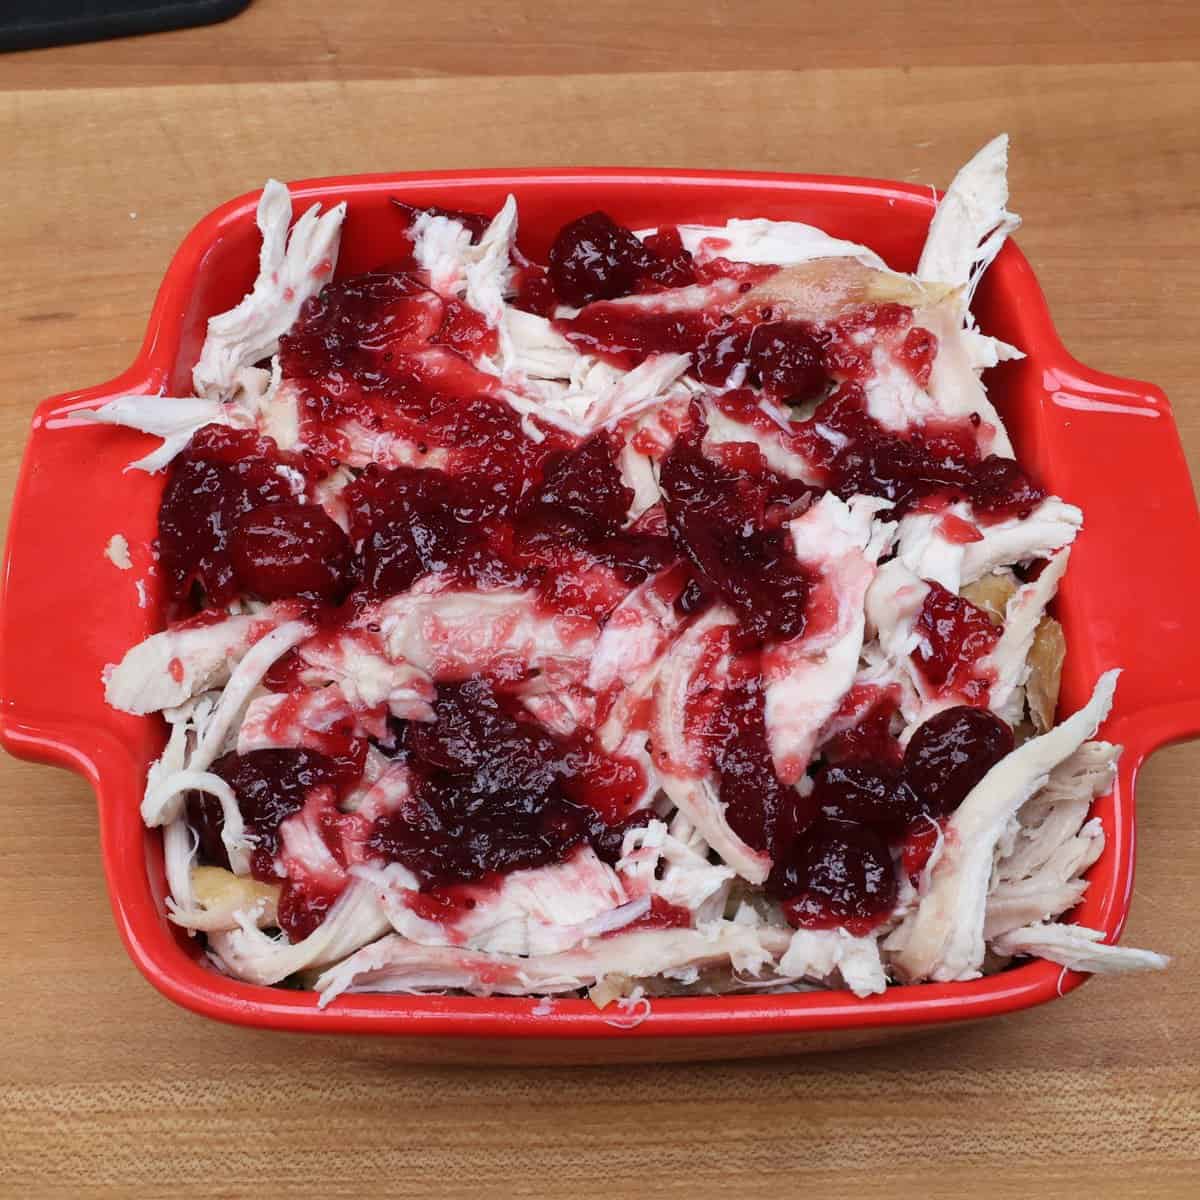 cranberry sauce on top of turkey over bread slices in a baking dish.